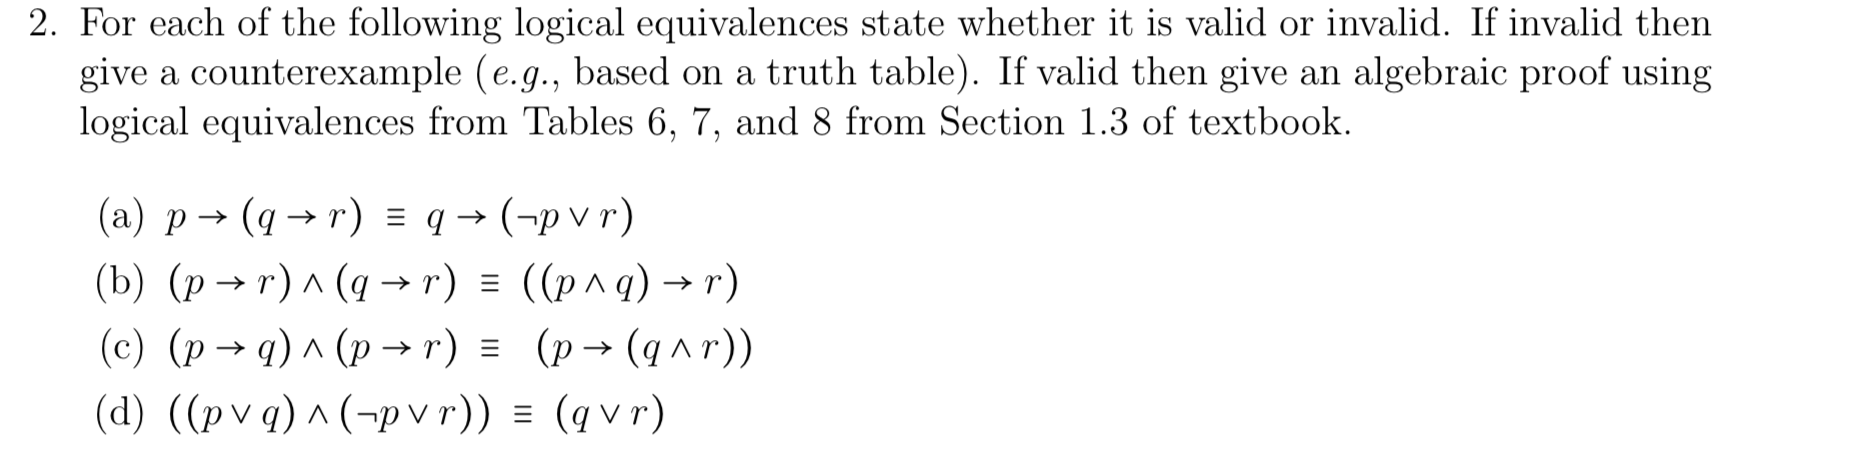 2. For each of the following logical equivalences state whether it is valid or invalid. If invalid then
give a counterexample (e.g., based on a truth table). If valid then give an algebraic proof using
logical equivalences from Tables 6, 7, and 8 from Section 1.3 of textbook.
(a) p→ (q → r) = q → (-p v r)
r) ^ (q → r) = ((p^q) → r)
(c) (p→ q) ^ (p → r) = (p→ (q^r))
(d) ((pvq) ^ (¬p v r)) = (q v r)
